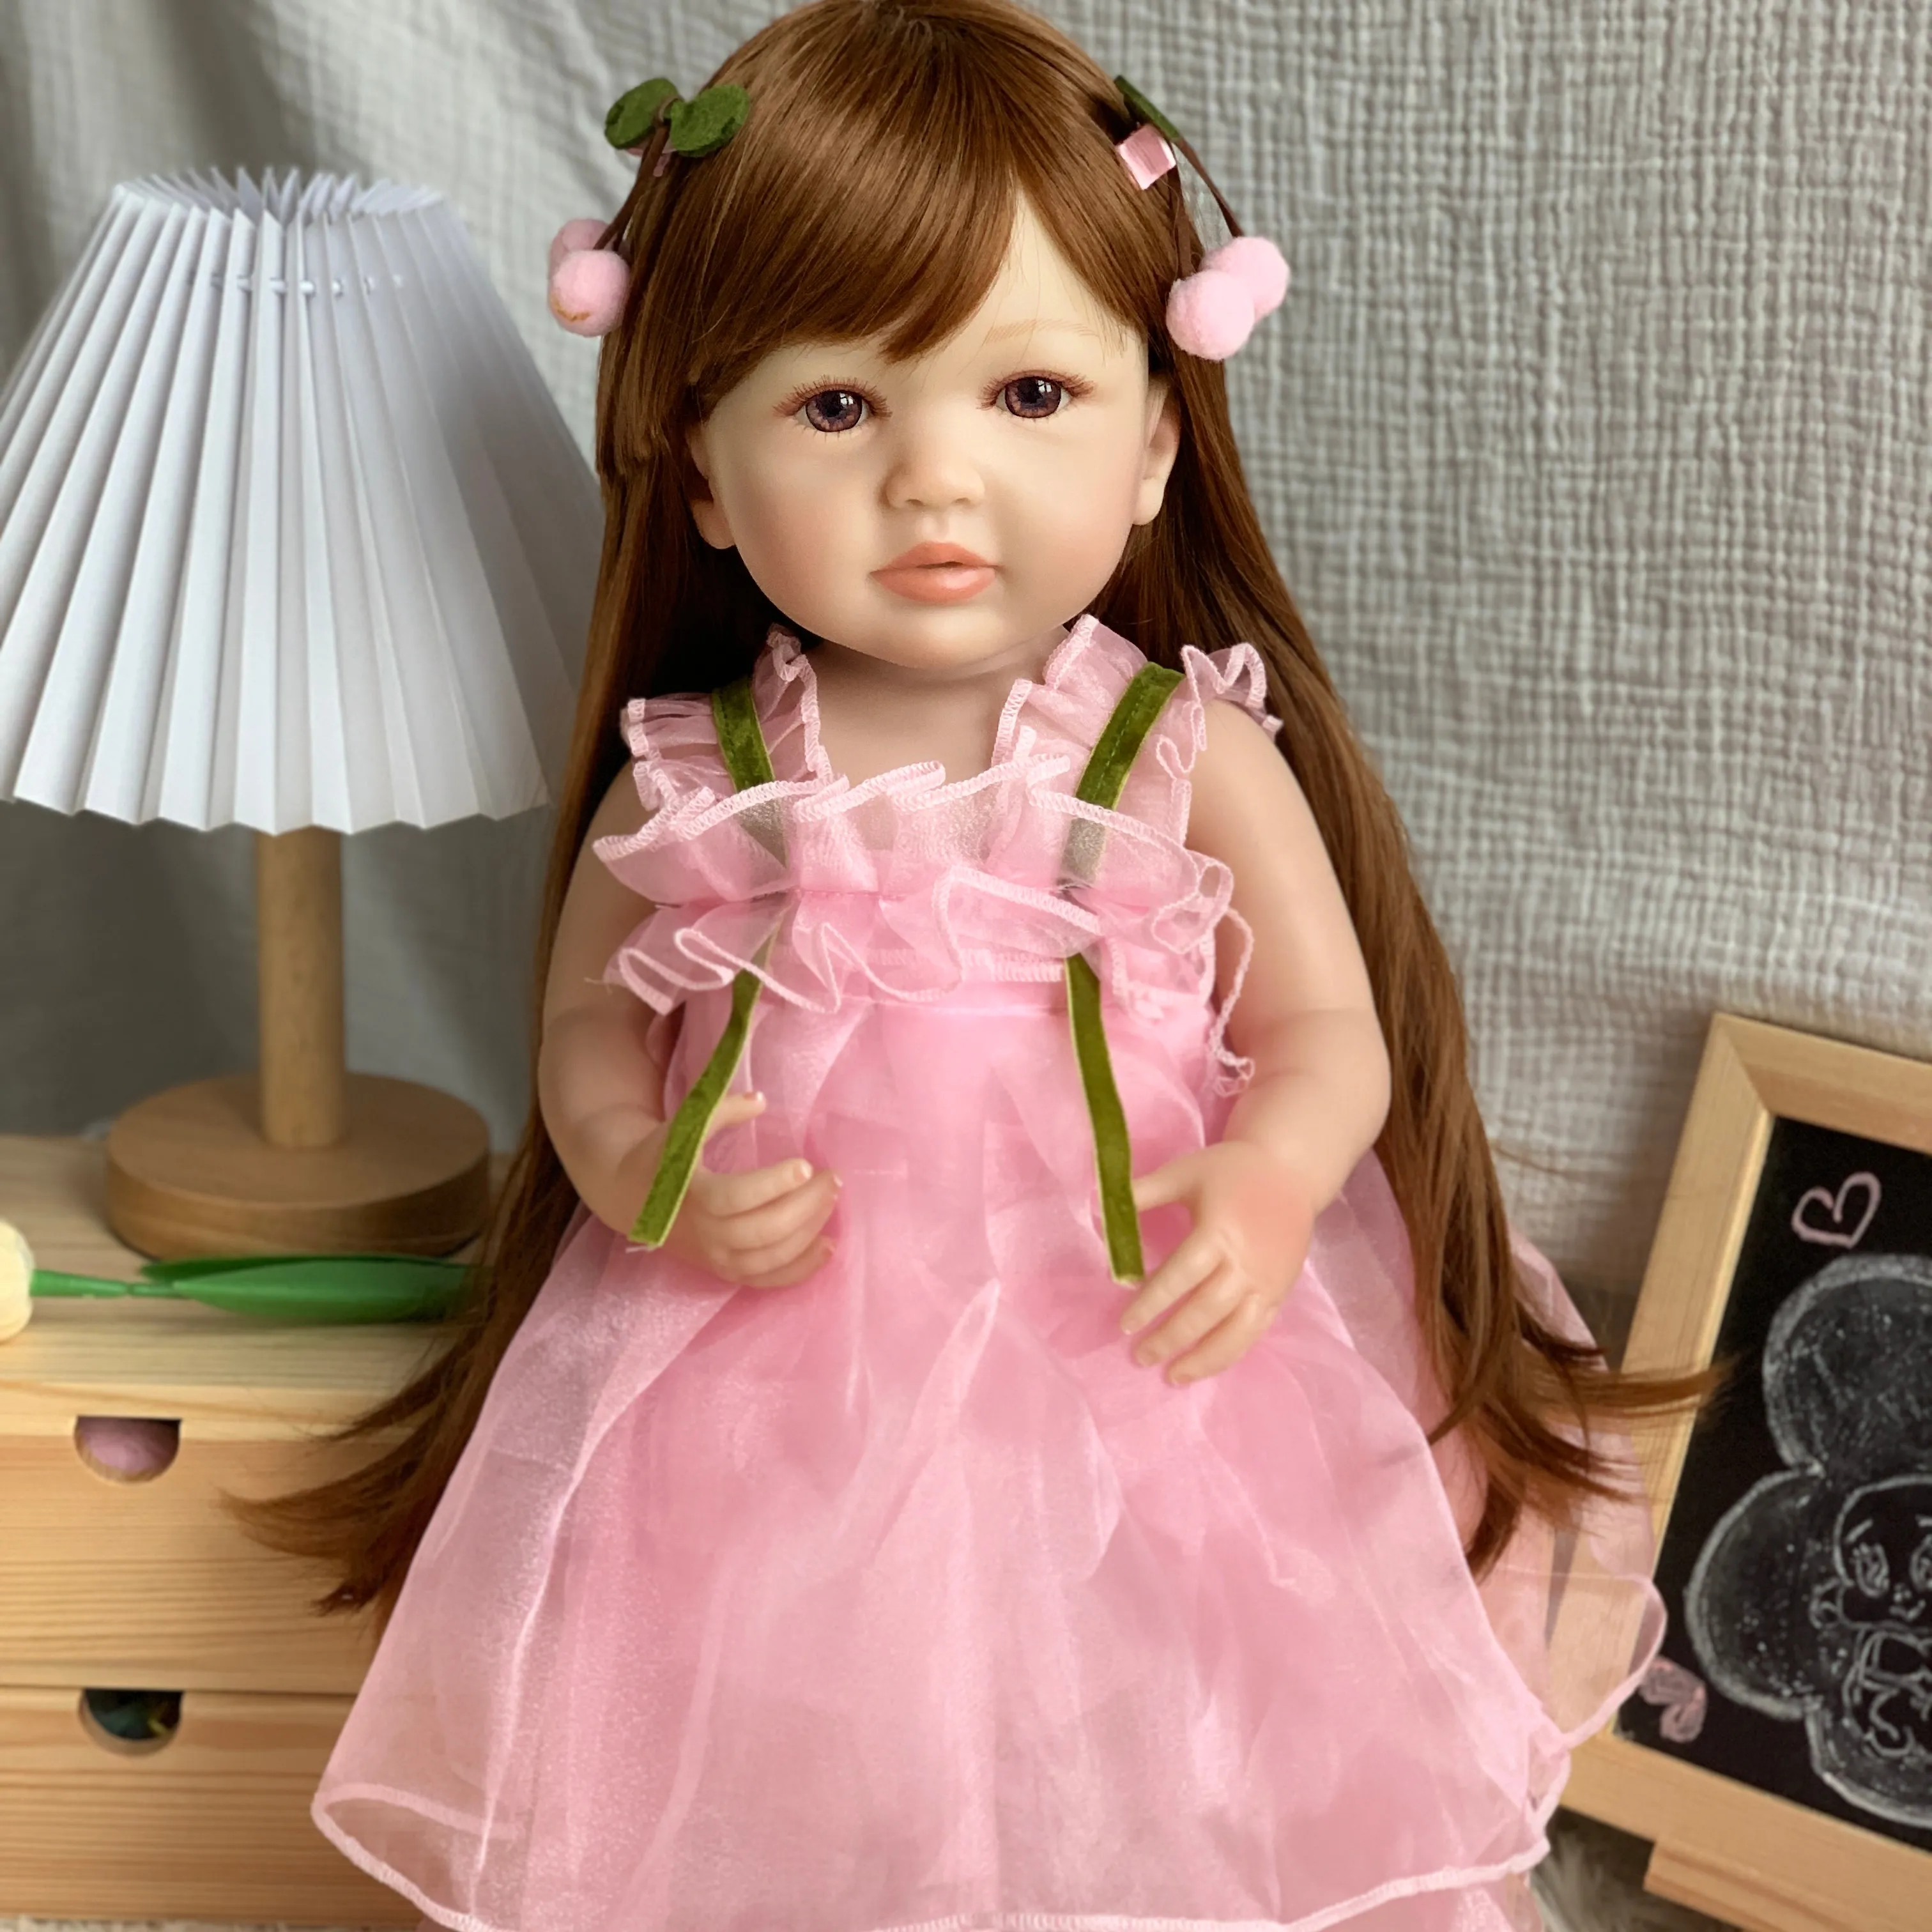 R&B Wholesale Inch Model Toy Loli Girls Clothes And Sale Brown Made China Pee Drinking Silicone Reborn Baby Dolls